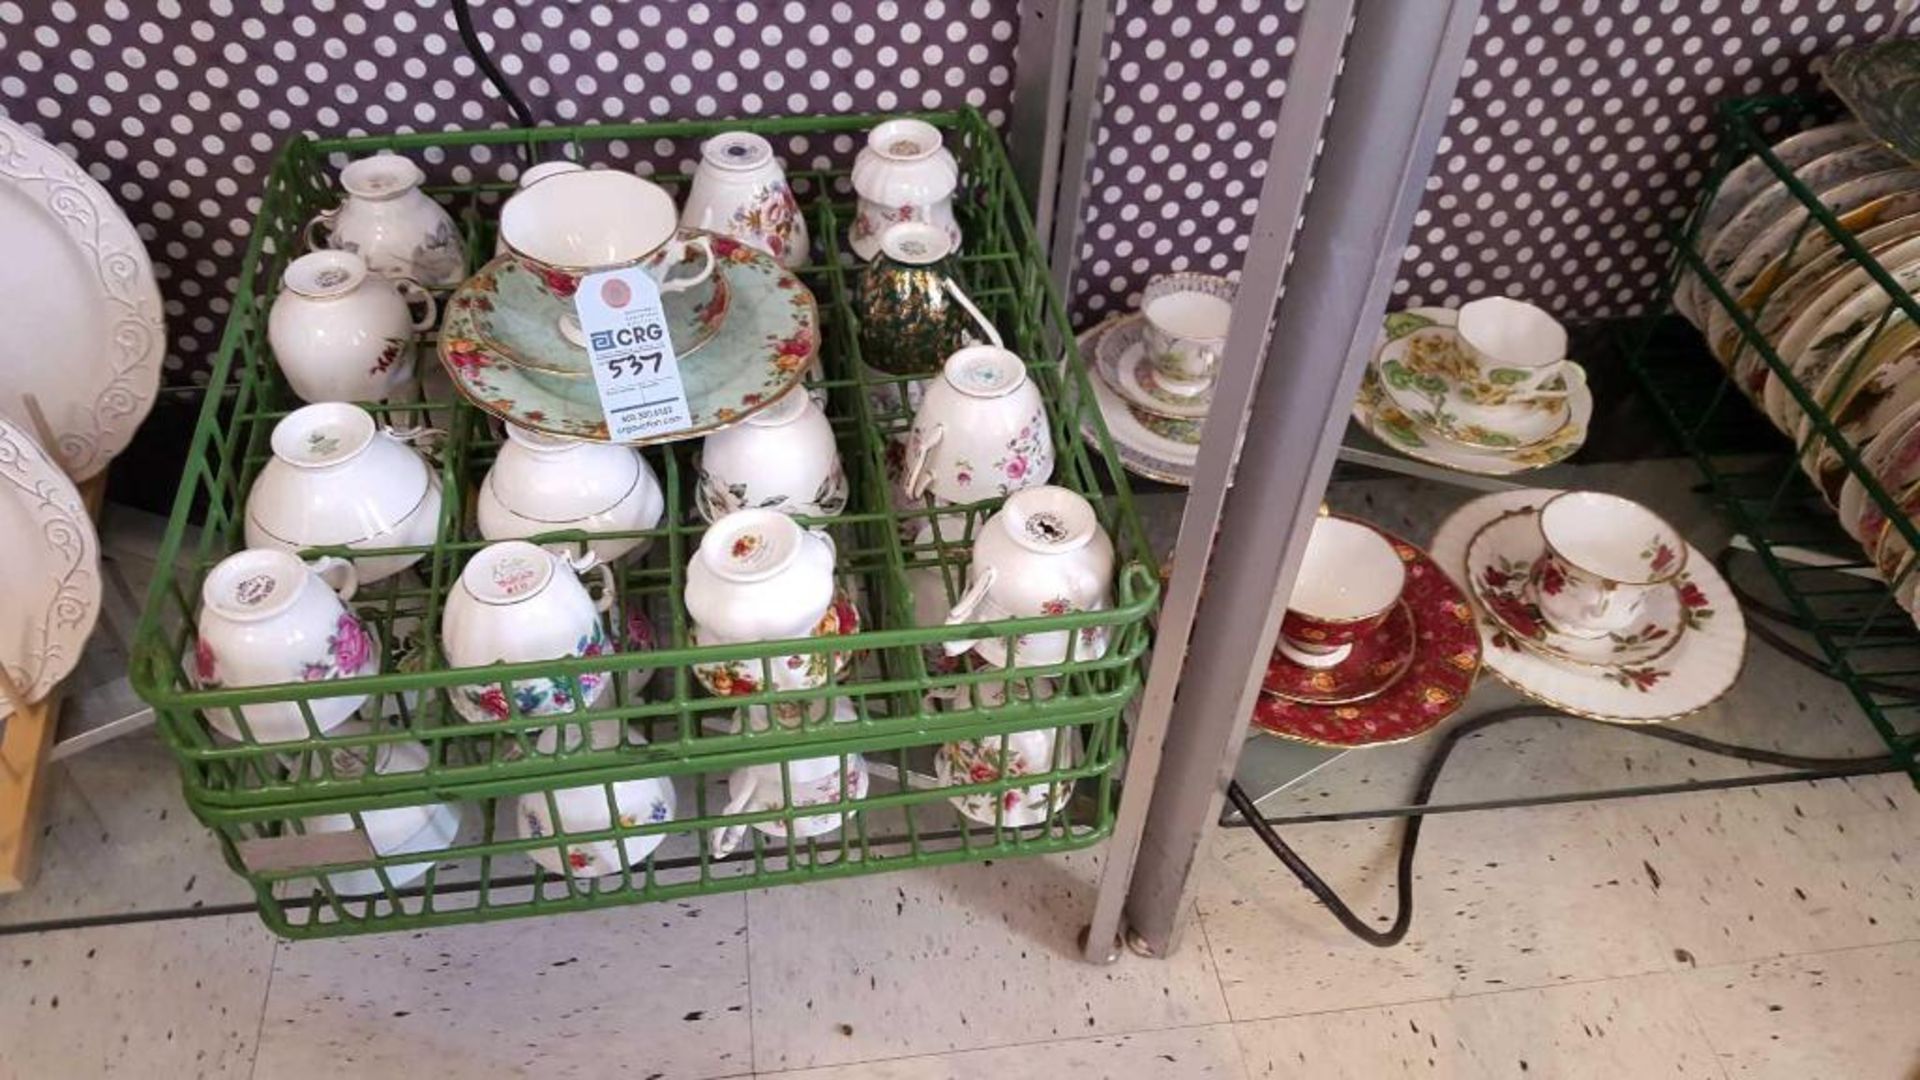 Lot of assorted vintage china cups, saucers, and dessert plates, in (6) wire crates. Add'l fee of $8